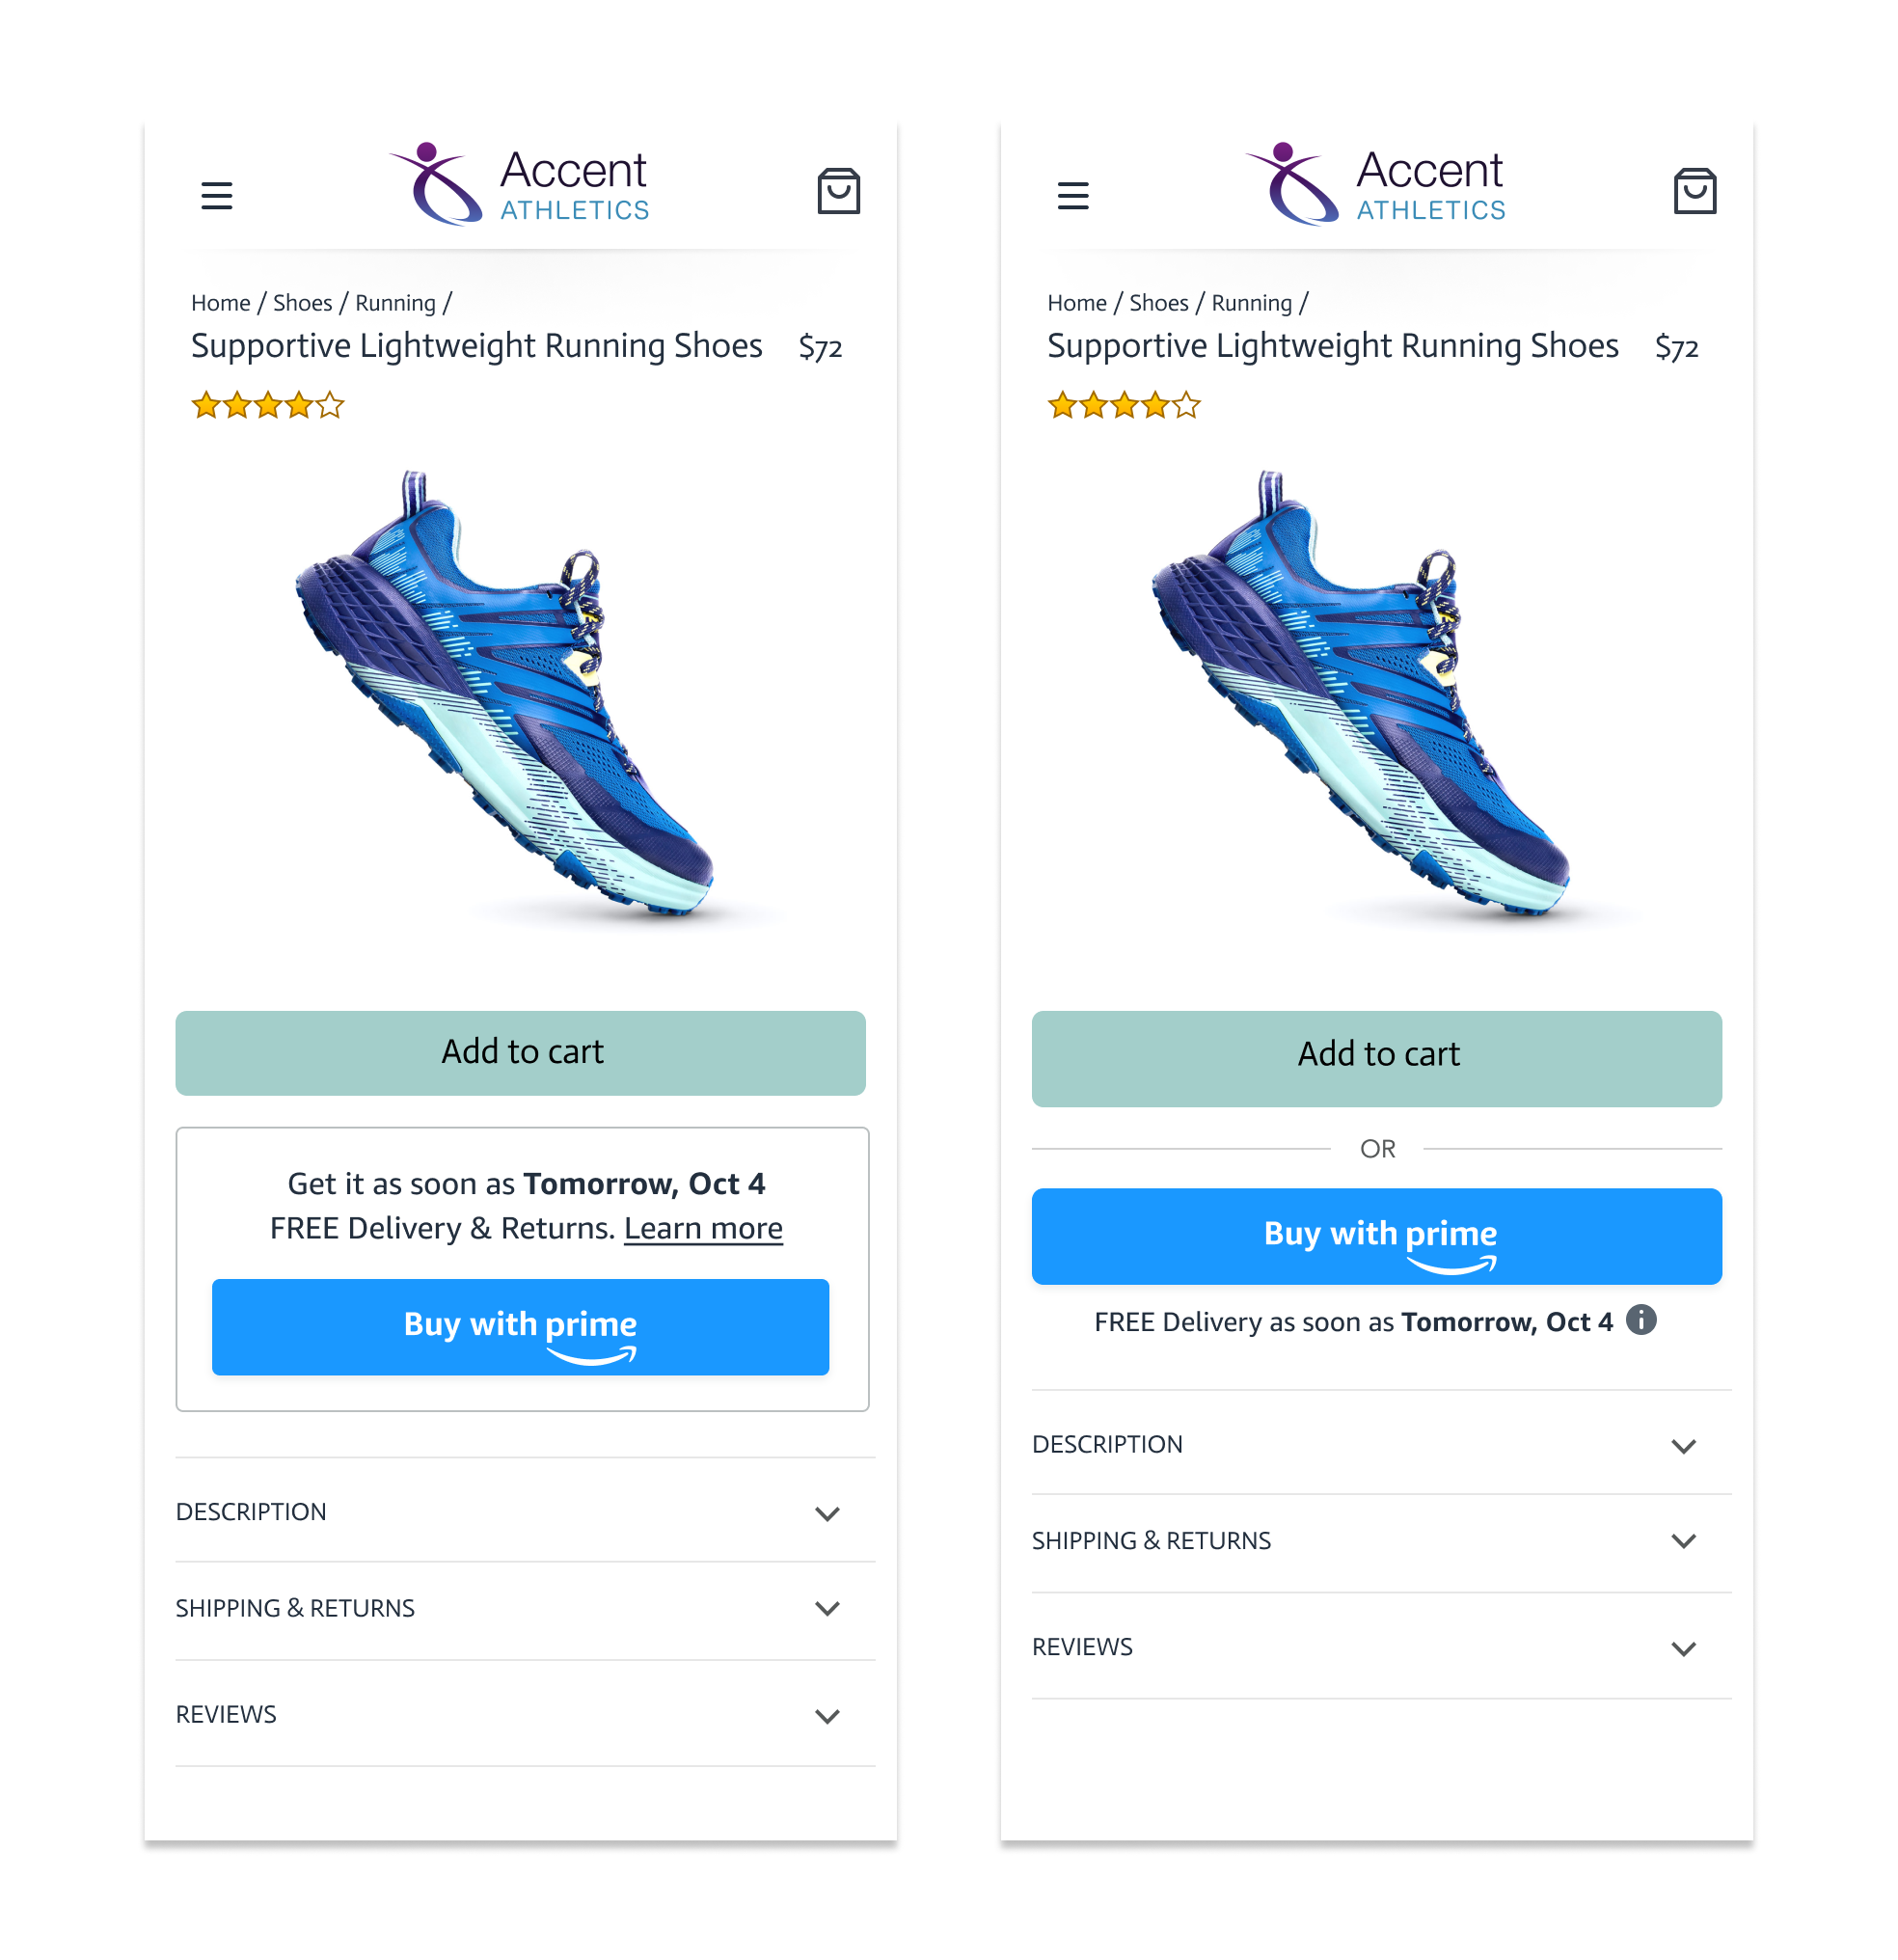 Product detail page showing two variations of the Prime delivery promise